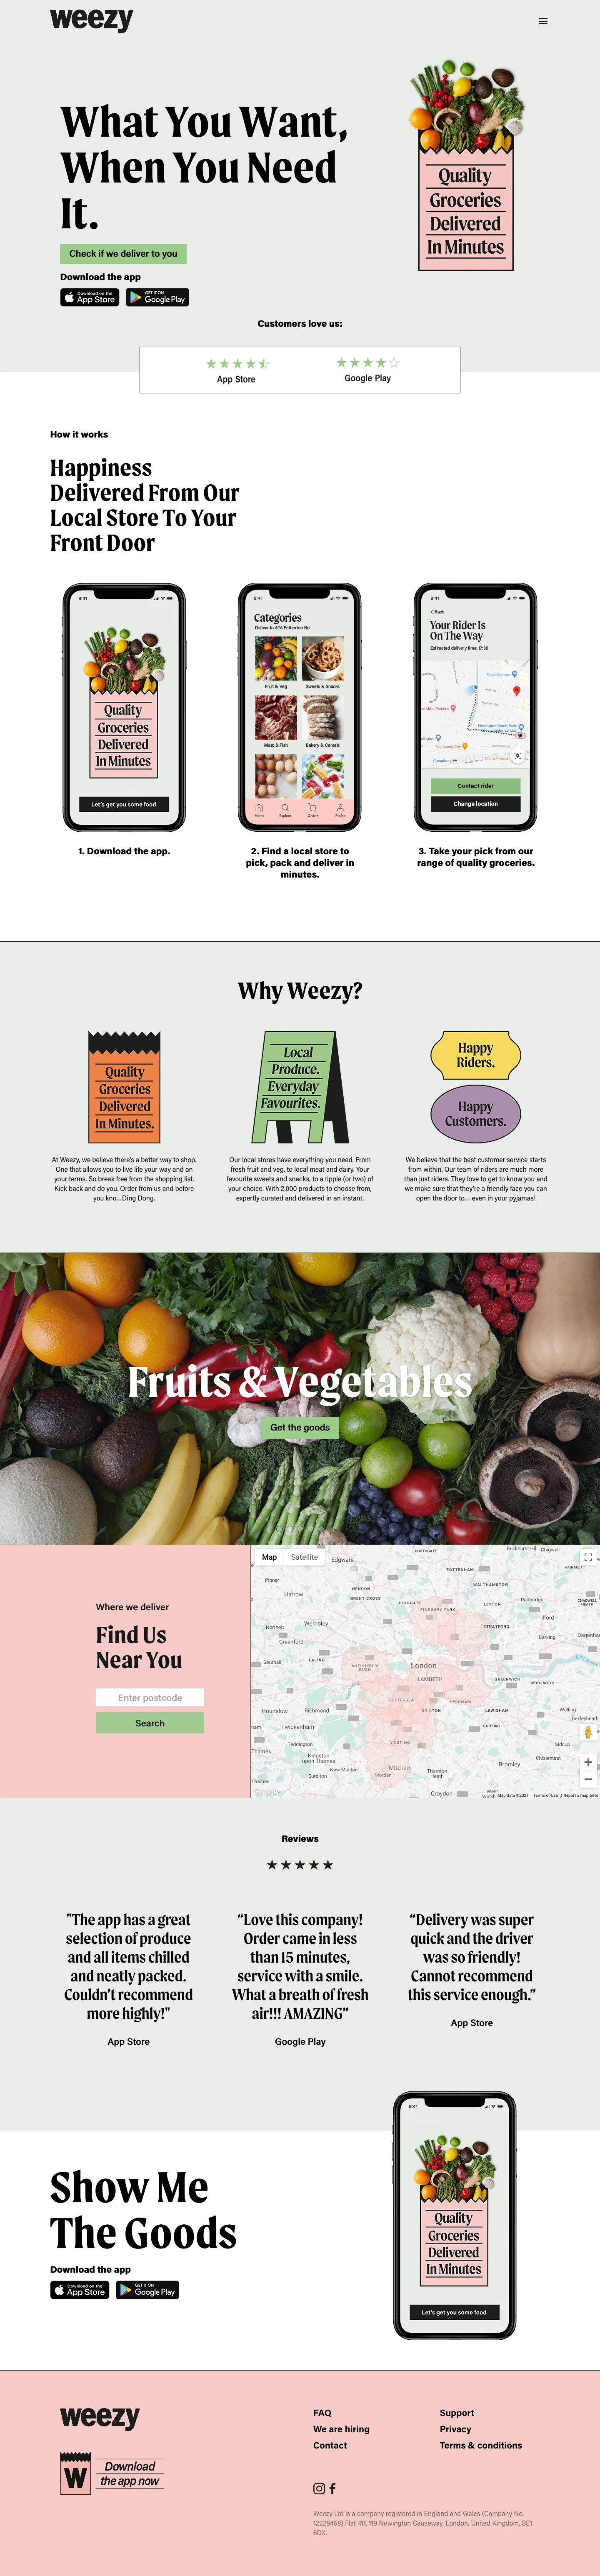 Weezy Landing Page Example: A supermarket that delivers in 15 minutes. Order in seconds, deliver in minutes.